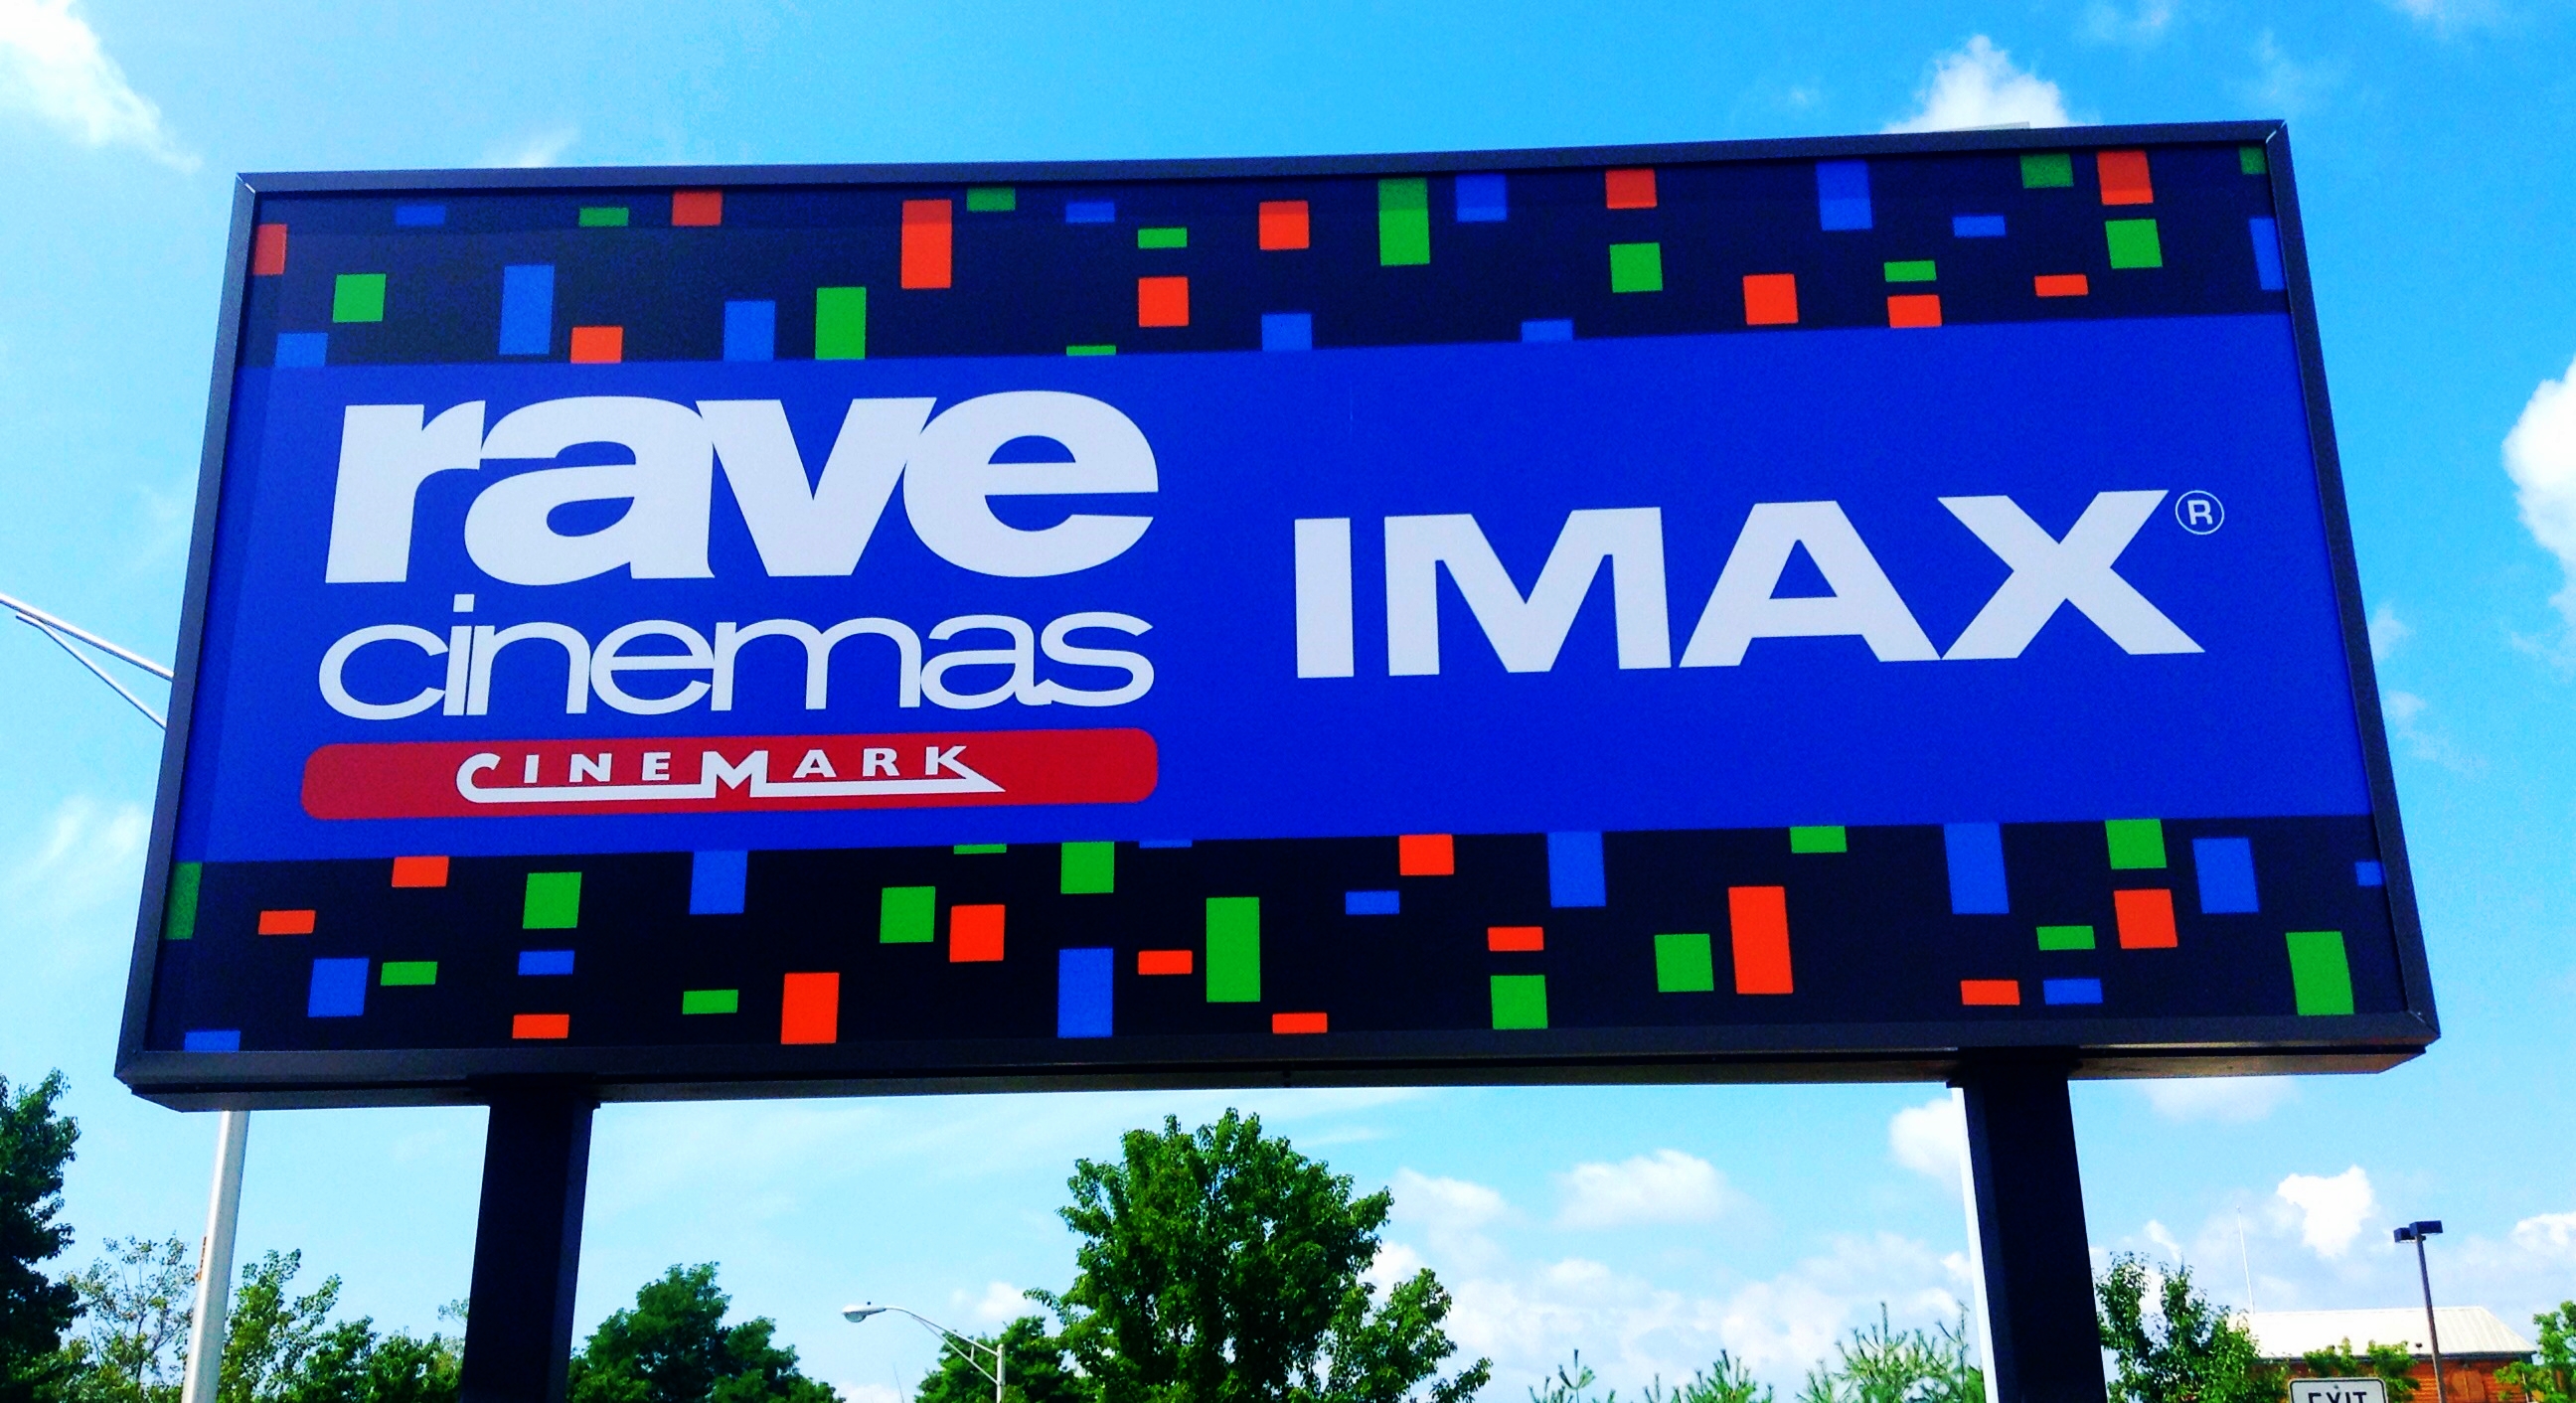 a blue sign advertising rave cinema max